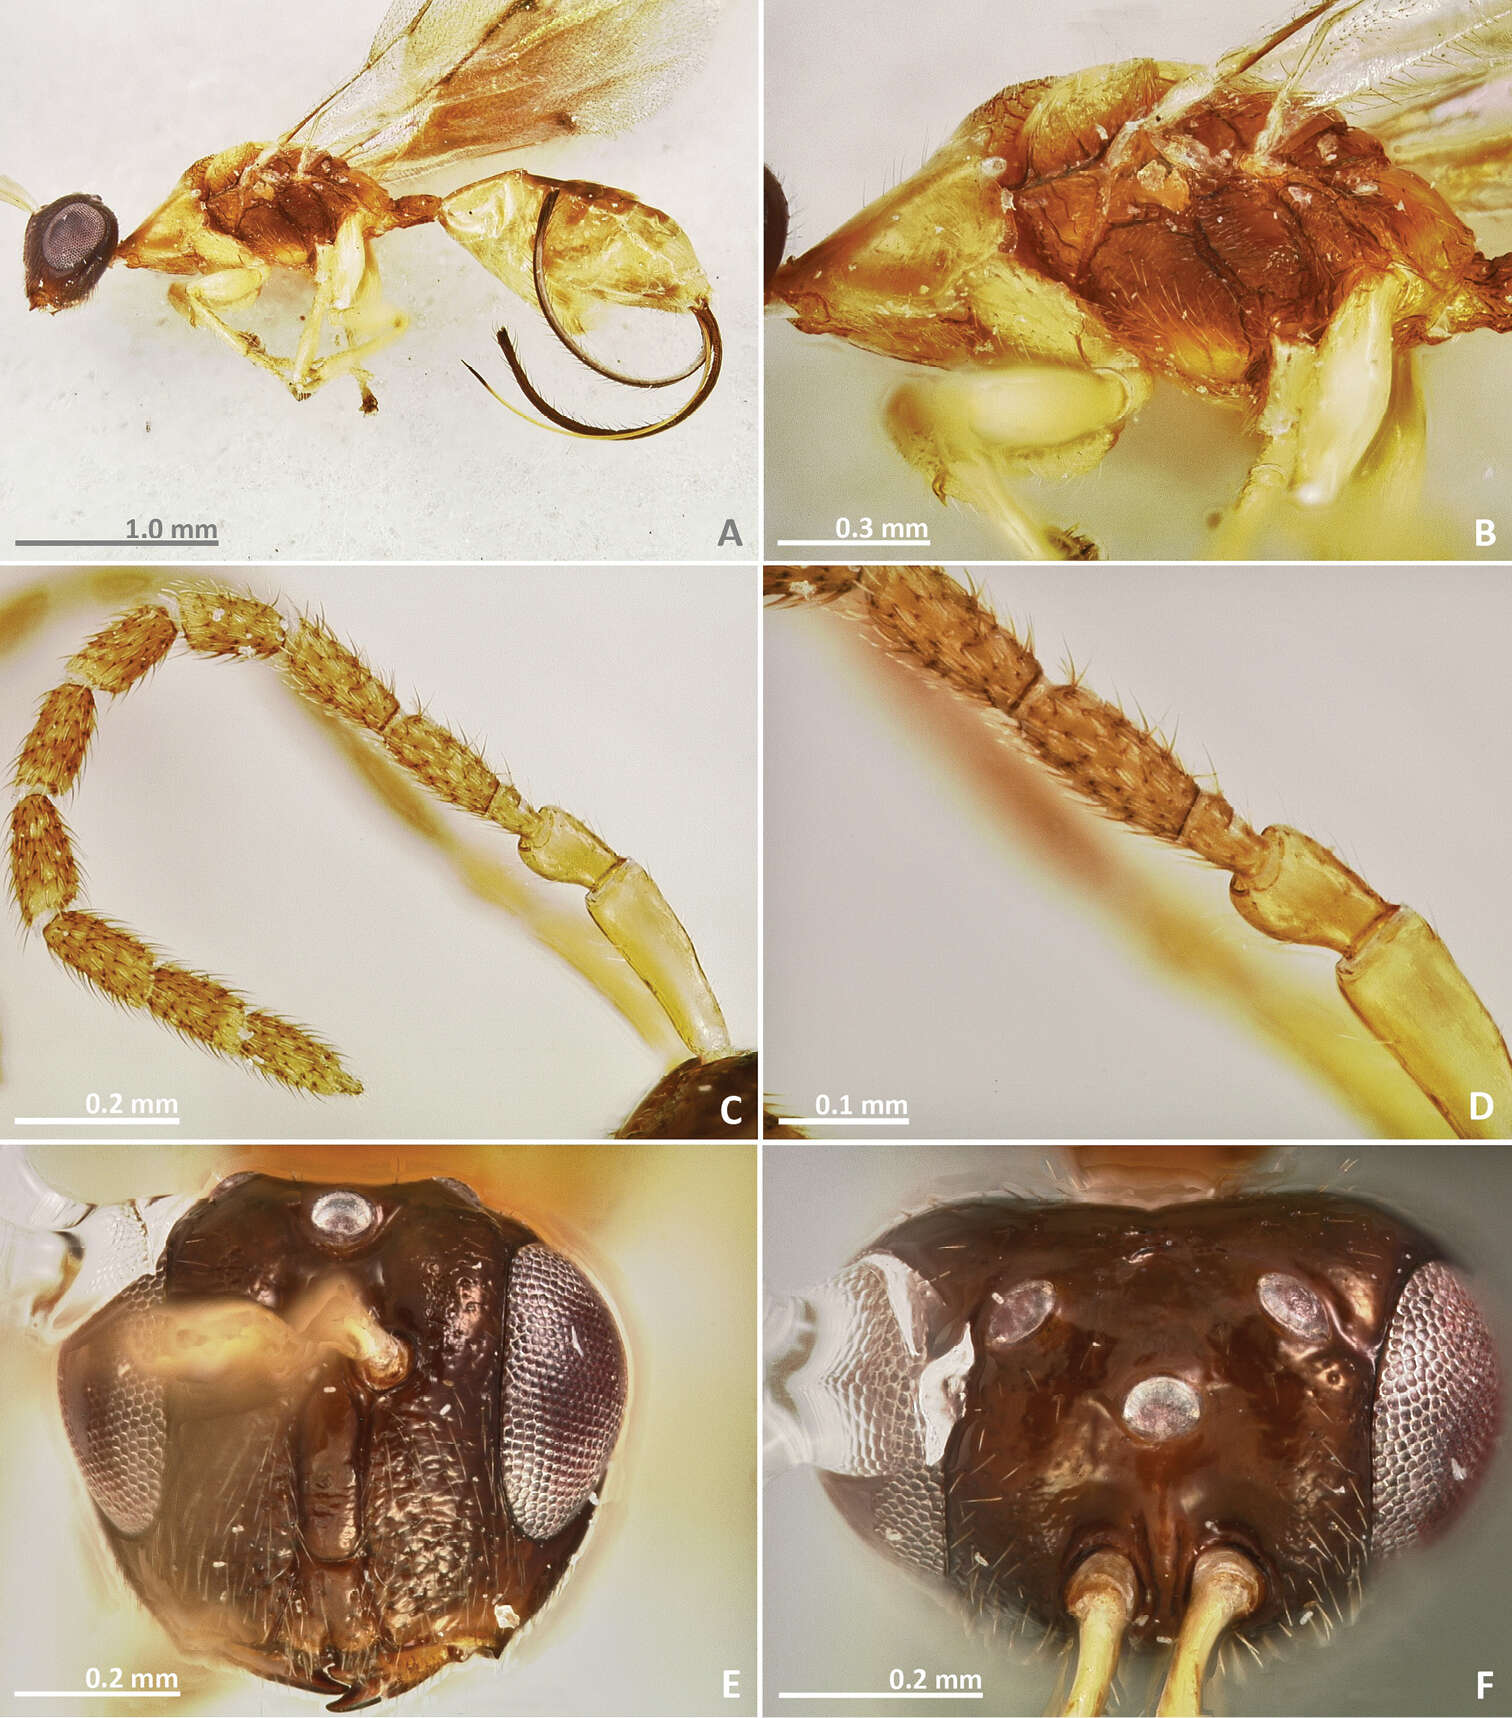 Image of fig wasps